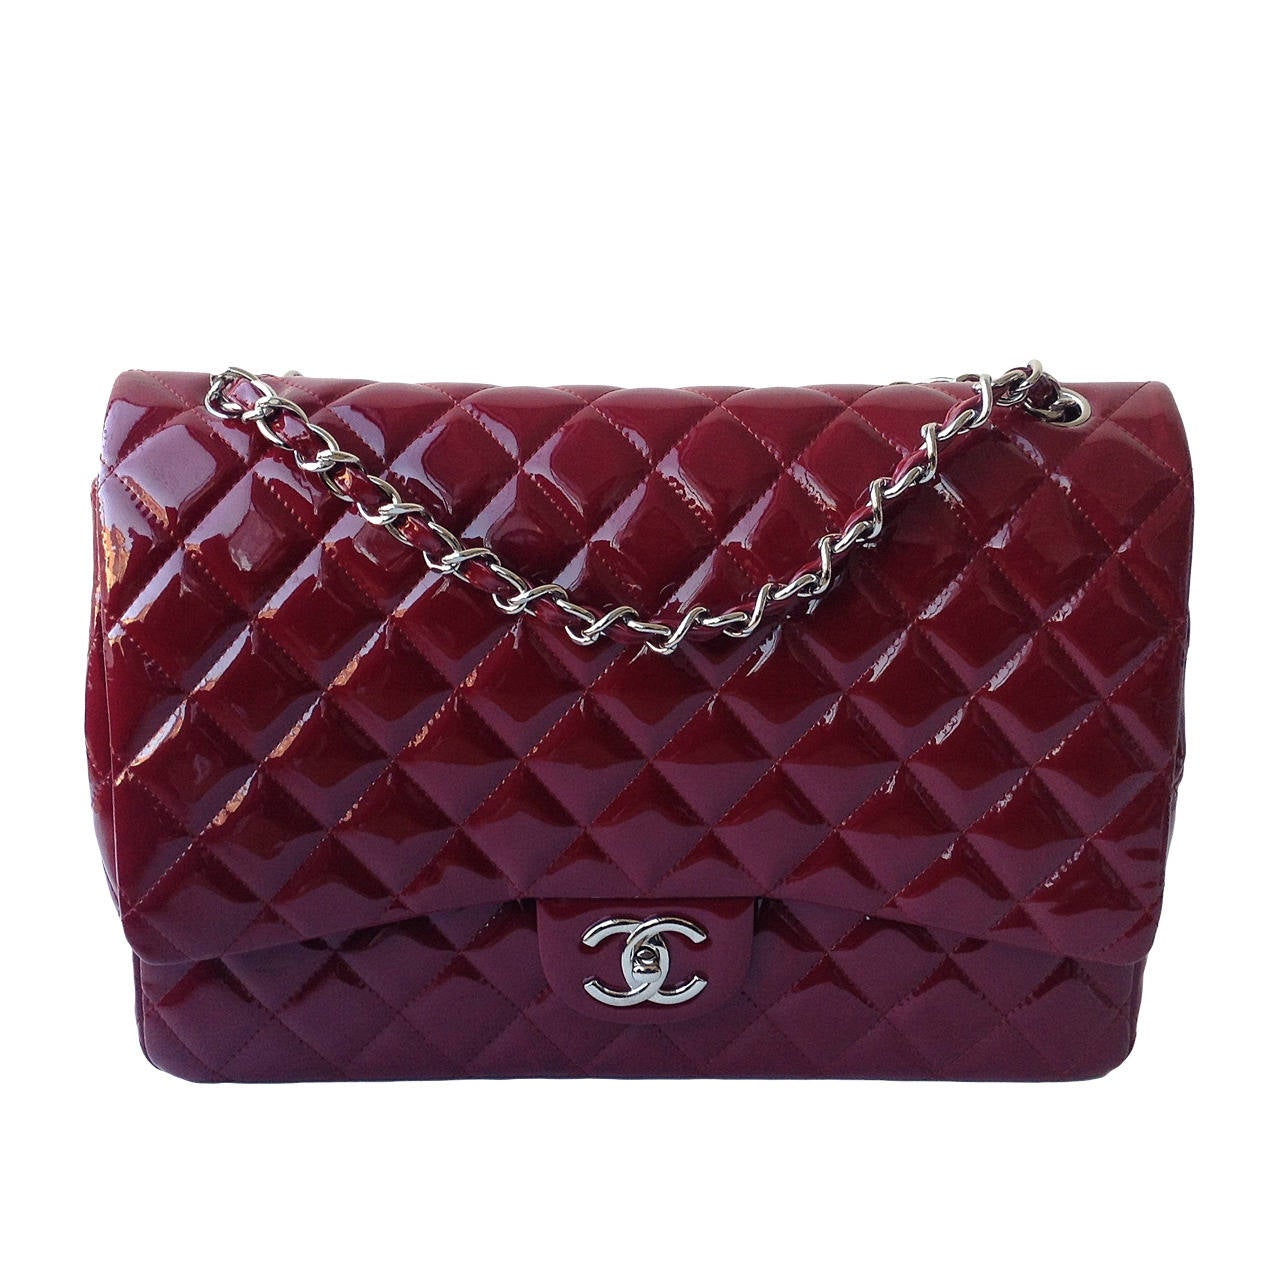 Chanel Patent Wine Red Maxi Double Flap Handbag SHW For Sale